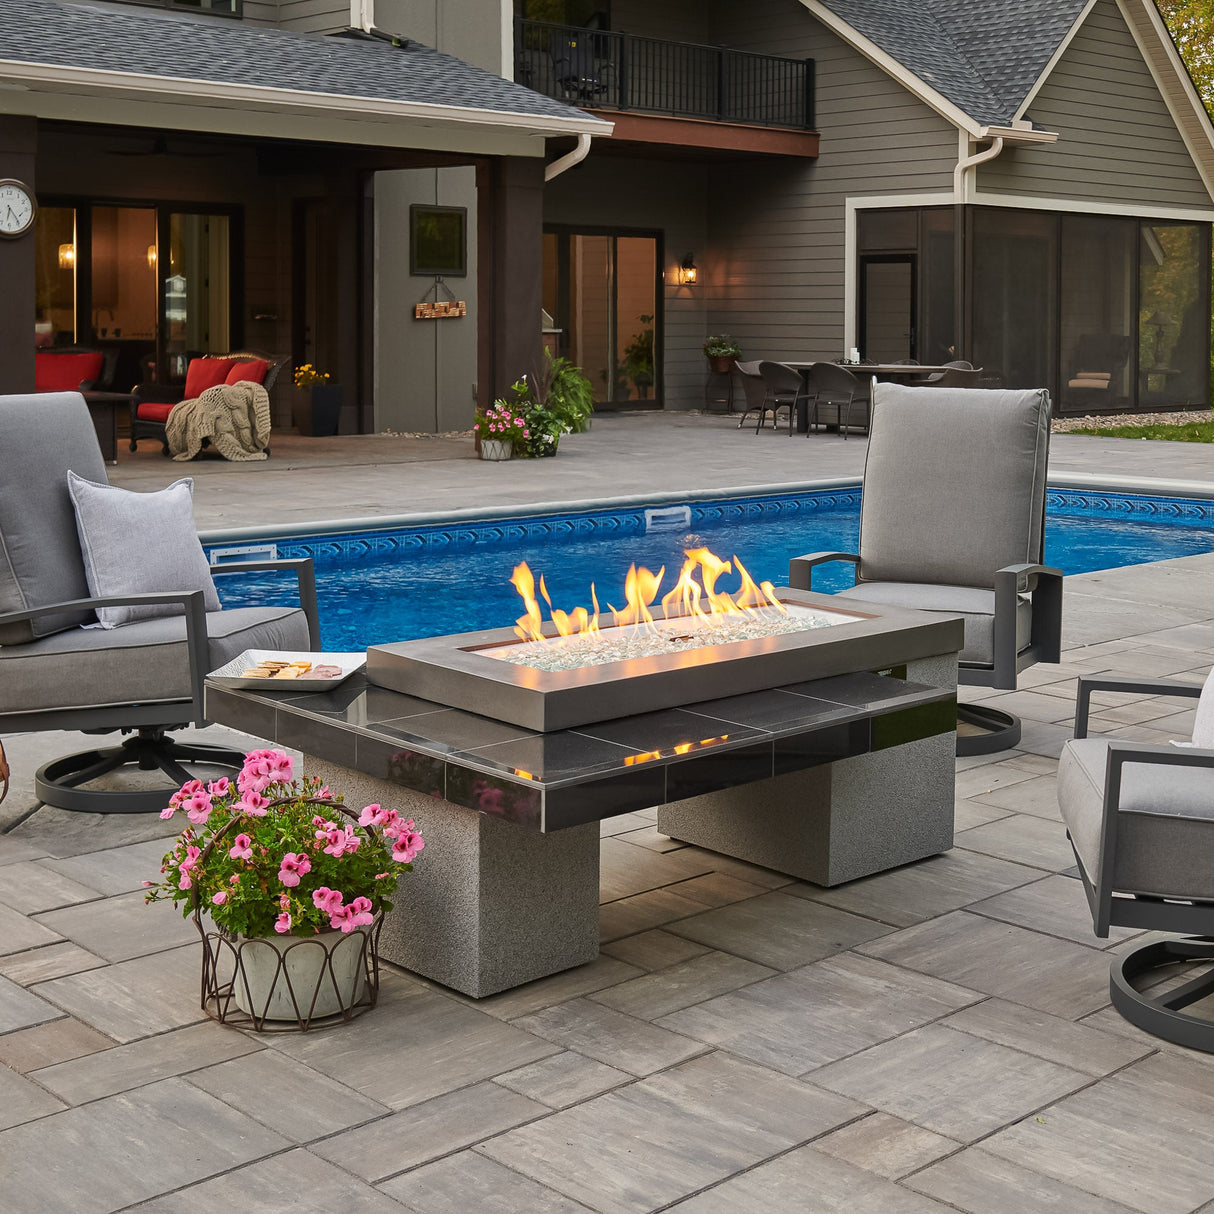 The Black Uptown Linear Gas Fire Pit Table next to a pool and surrounded by patio furniture